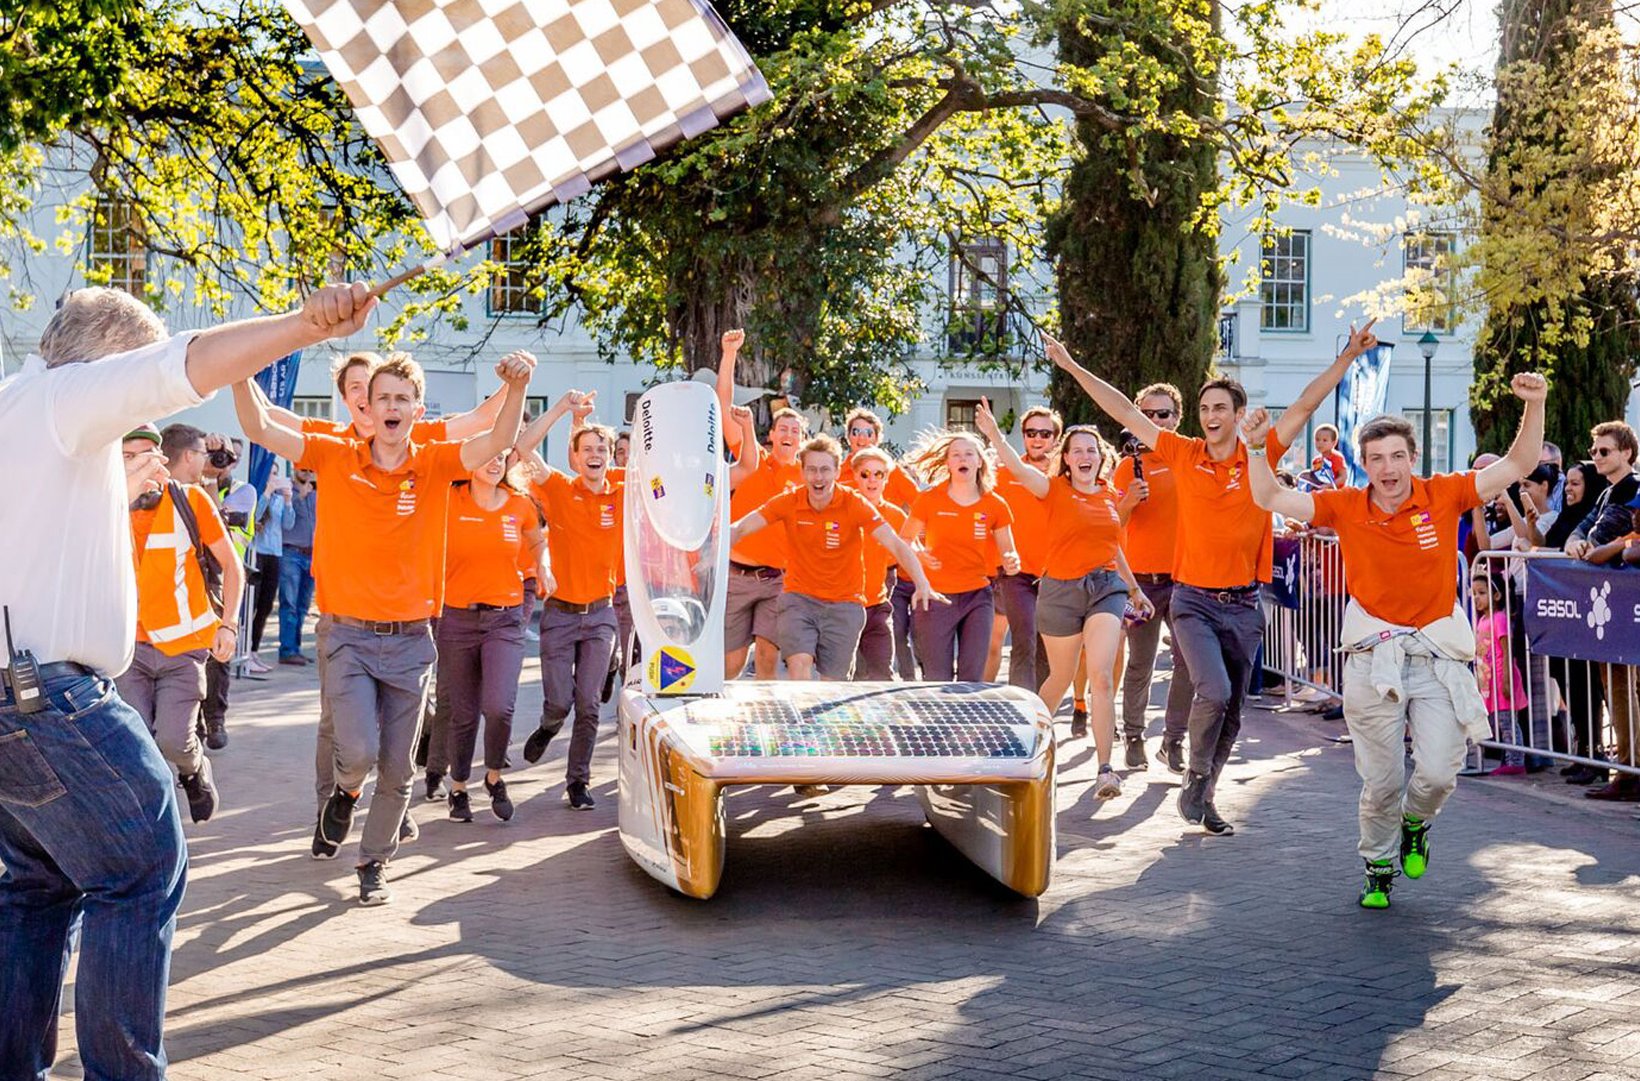 Nuon Solar Team were crowned winners in the solar car race held in South Africa - Nuna9s